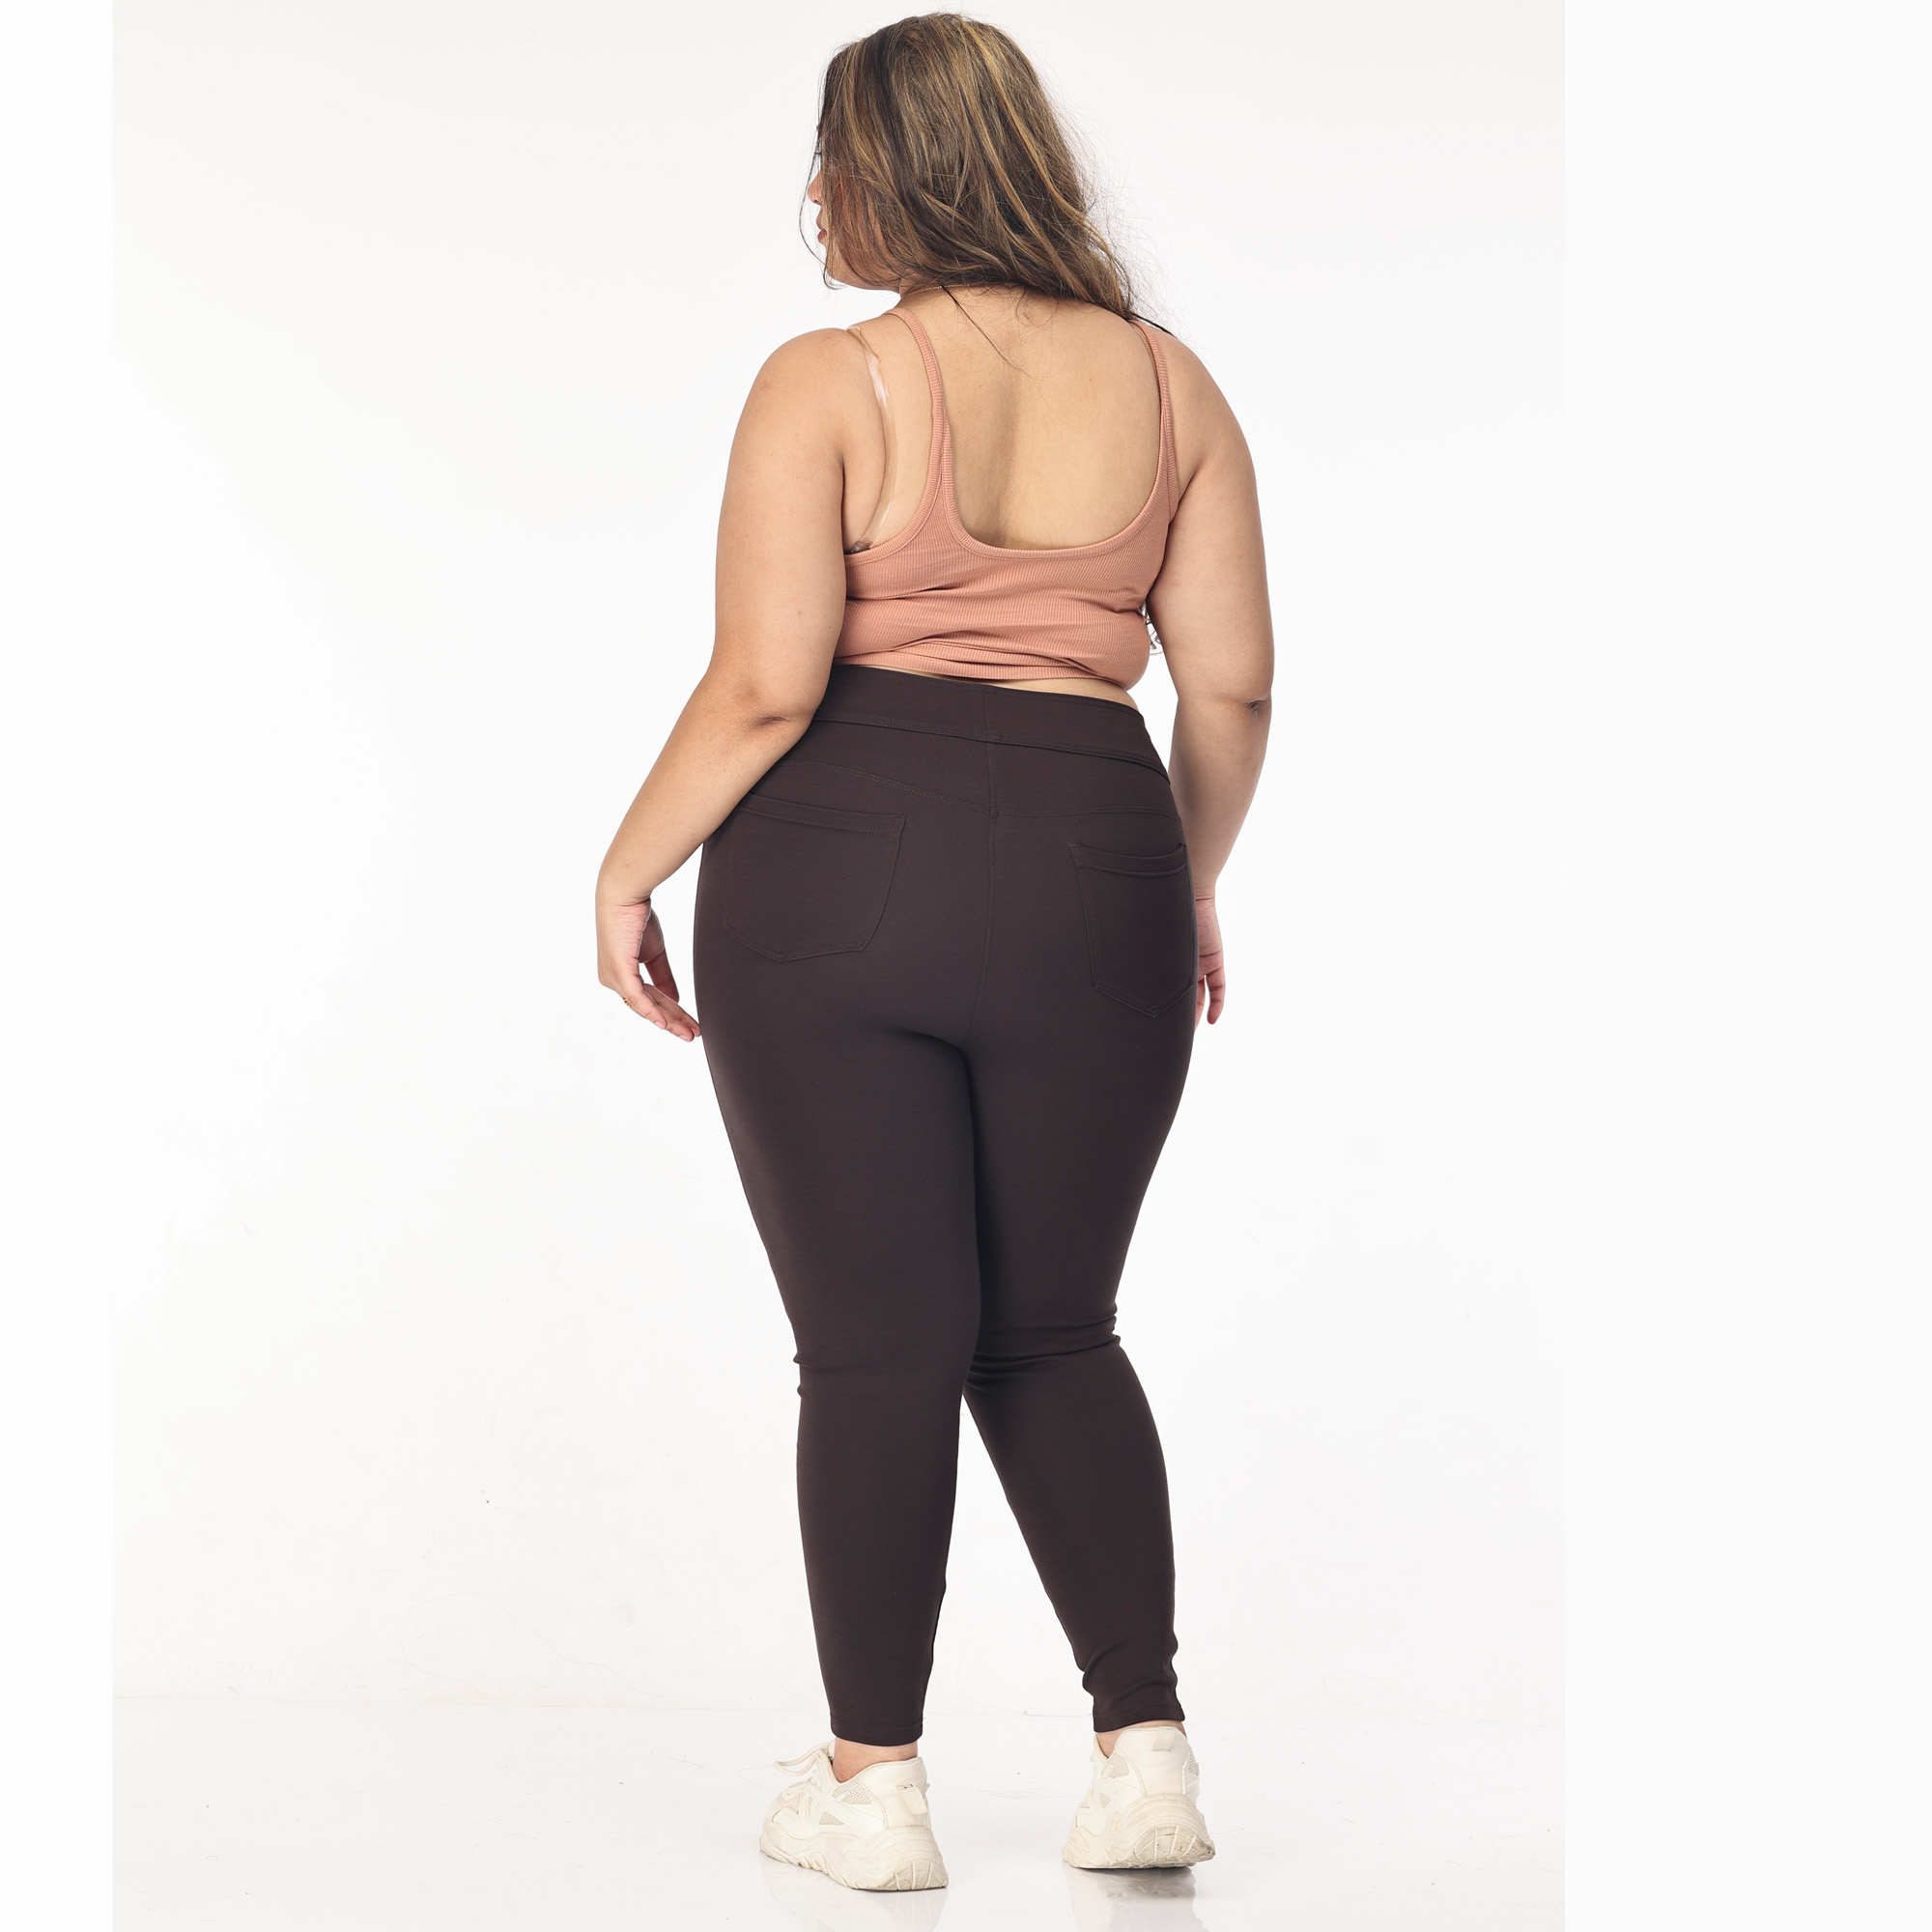 Women's Plus Size High Waisted Cotton Compression Leggings. • Long, skinny  leg design • Does not ball or pill • Comfortable and easy pull-on style •  Very Stretchy • Tummy Control •